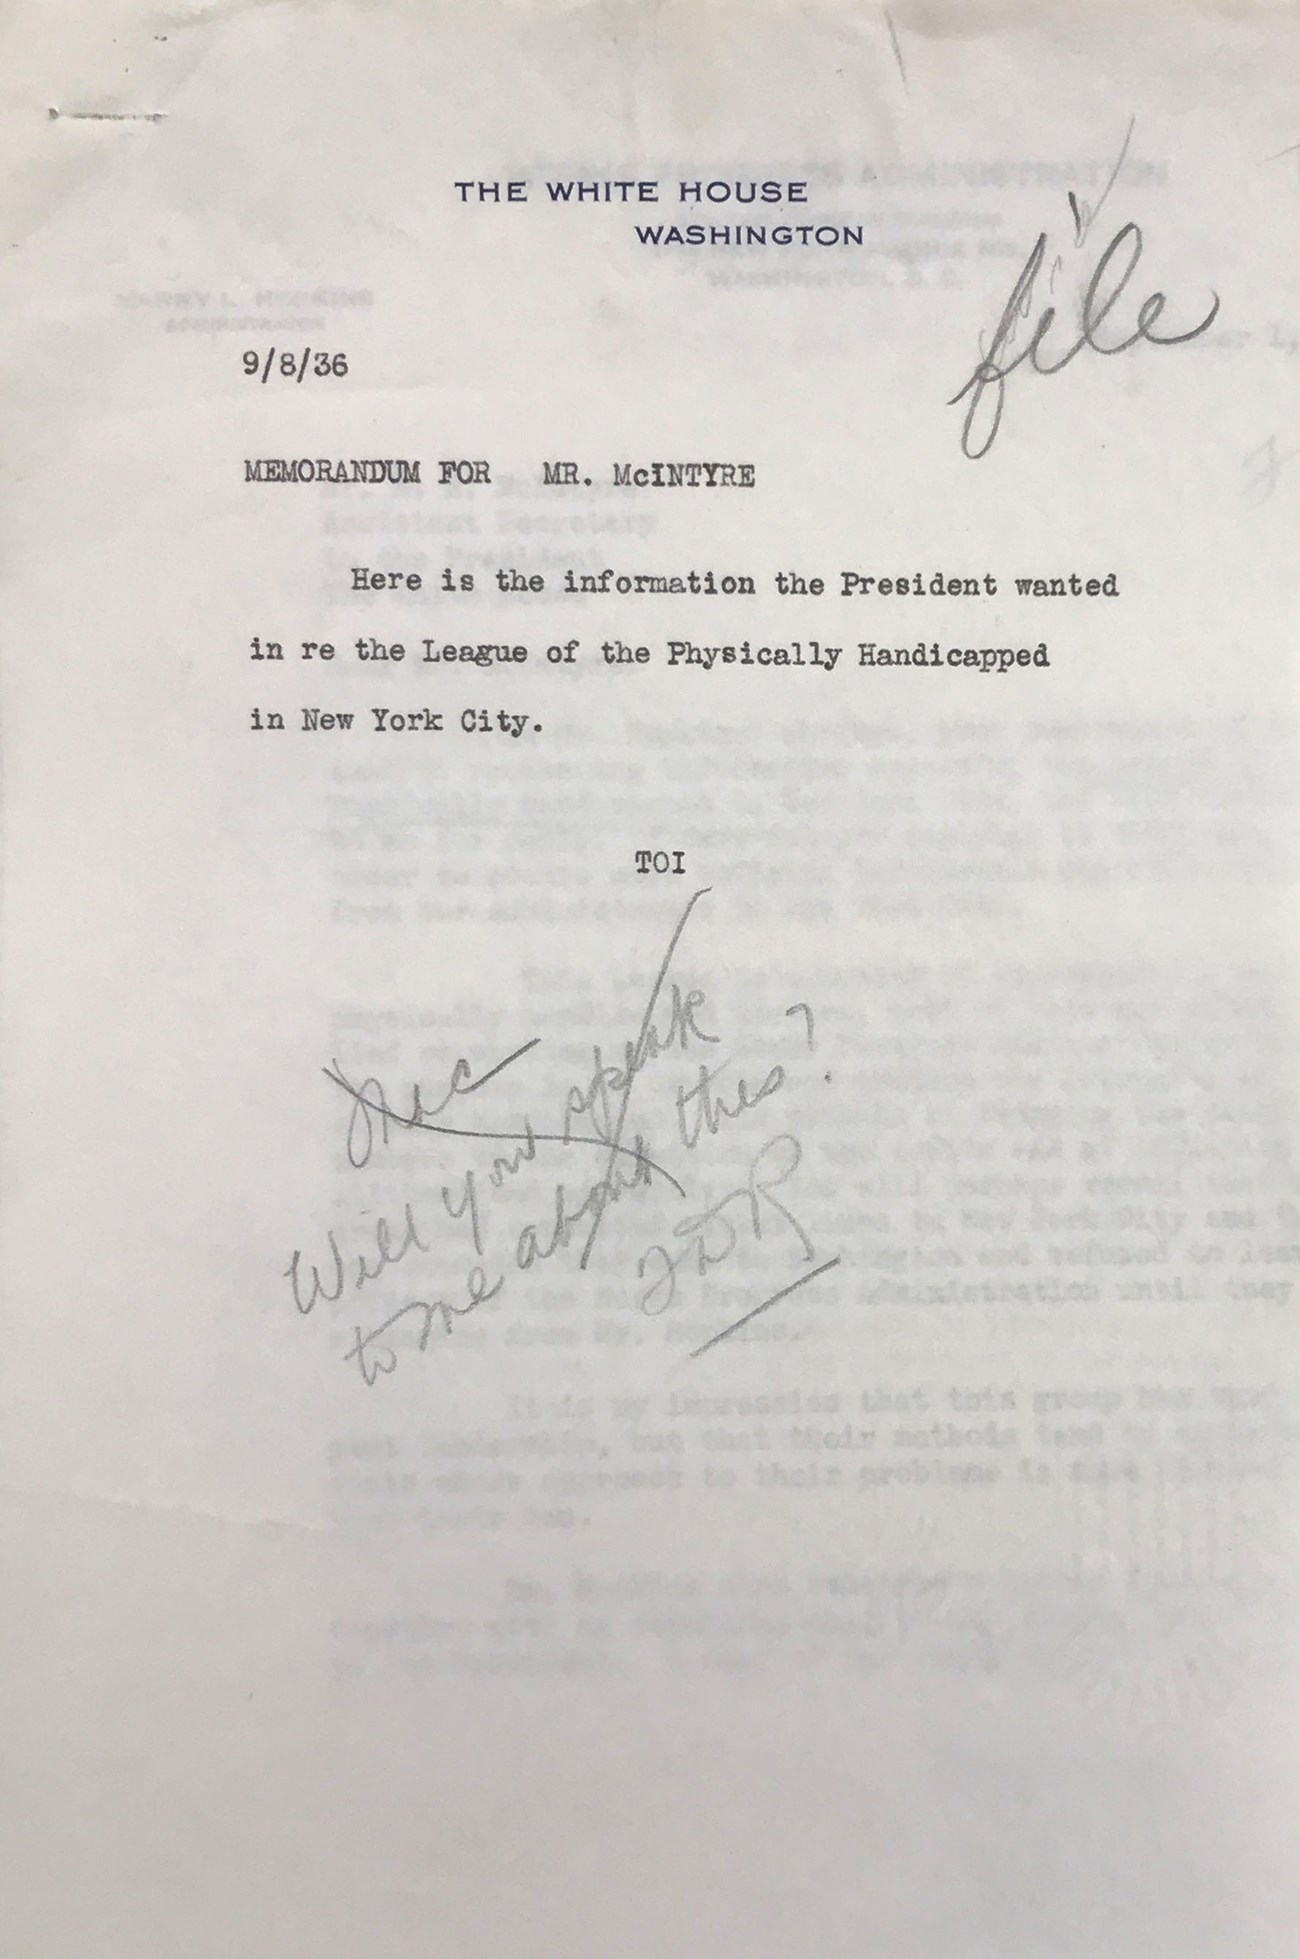 Typed memo to McIntyre from the White House annotated by FDR's secretary, Missy LeHand, asking for a meeting regarding the League of the Physically Handicapped. The handwritten note reads "Mac, Will you speak to me about this? FDR"